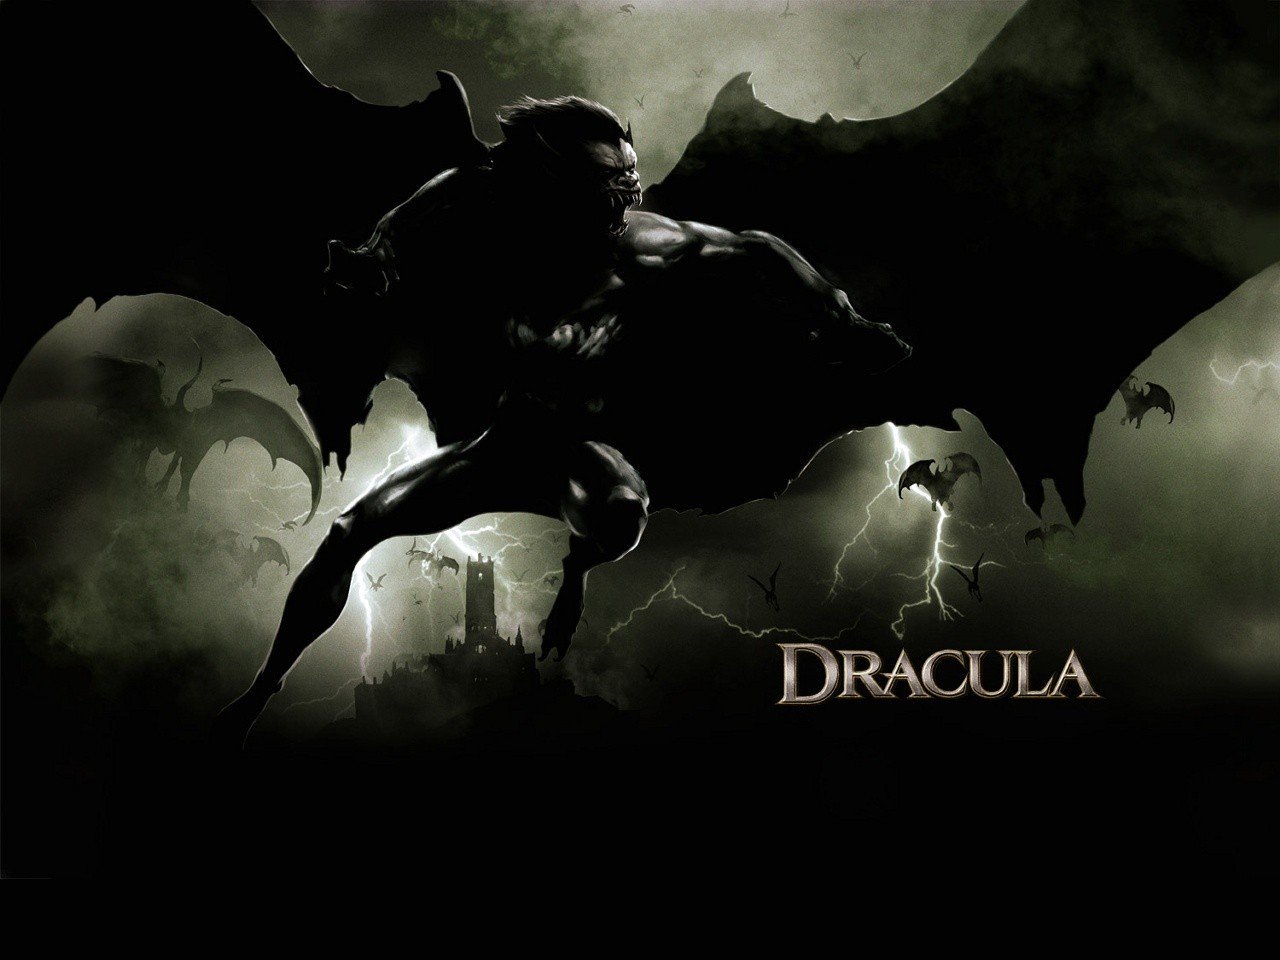 Gallery For Gt Dracula Wallpaper